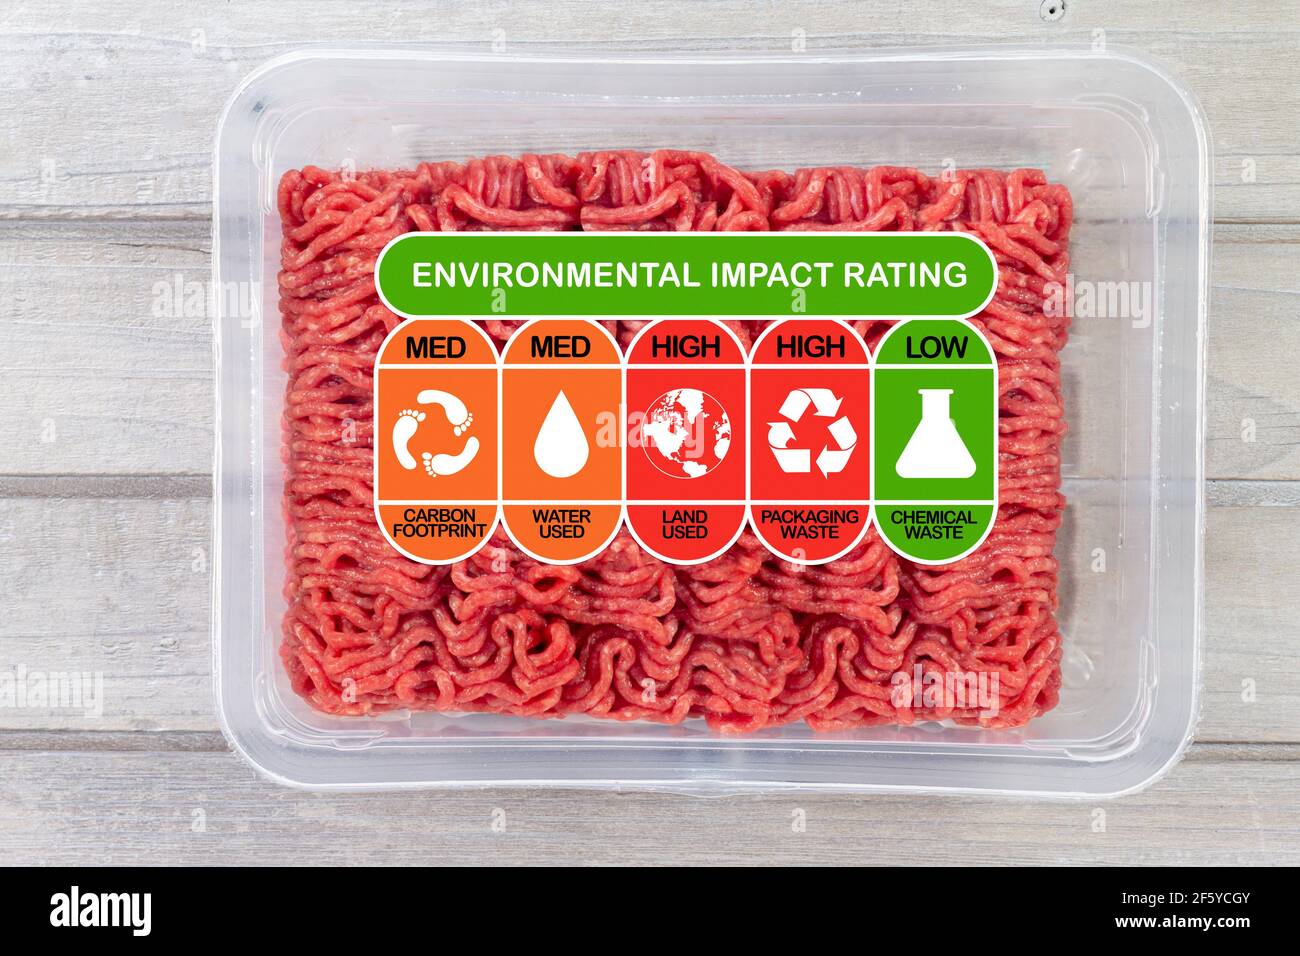 Environmental Impact Rating on packet of meat with high, med and low ratings for food carbon footprint, water use, land use, packaging waste Stock Photo